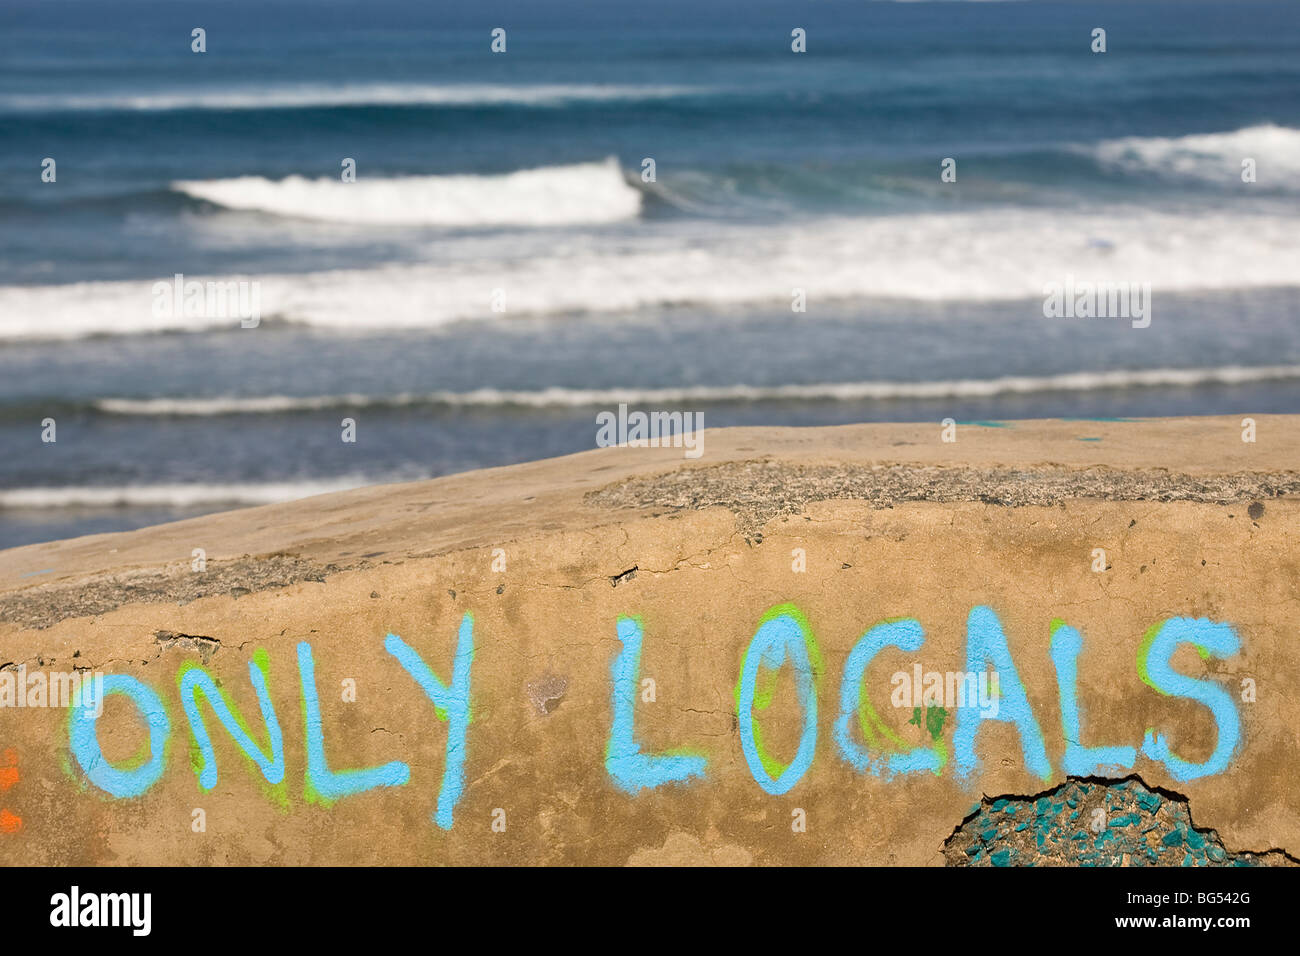 Surfing Grafitti on a wall by the La Cicer surf break in Las Palmas Stock Photo